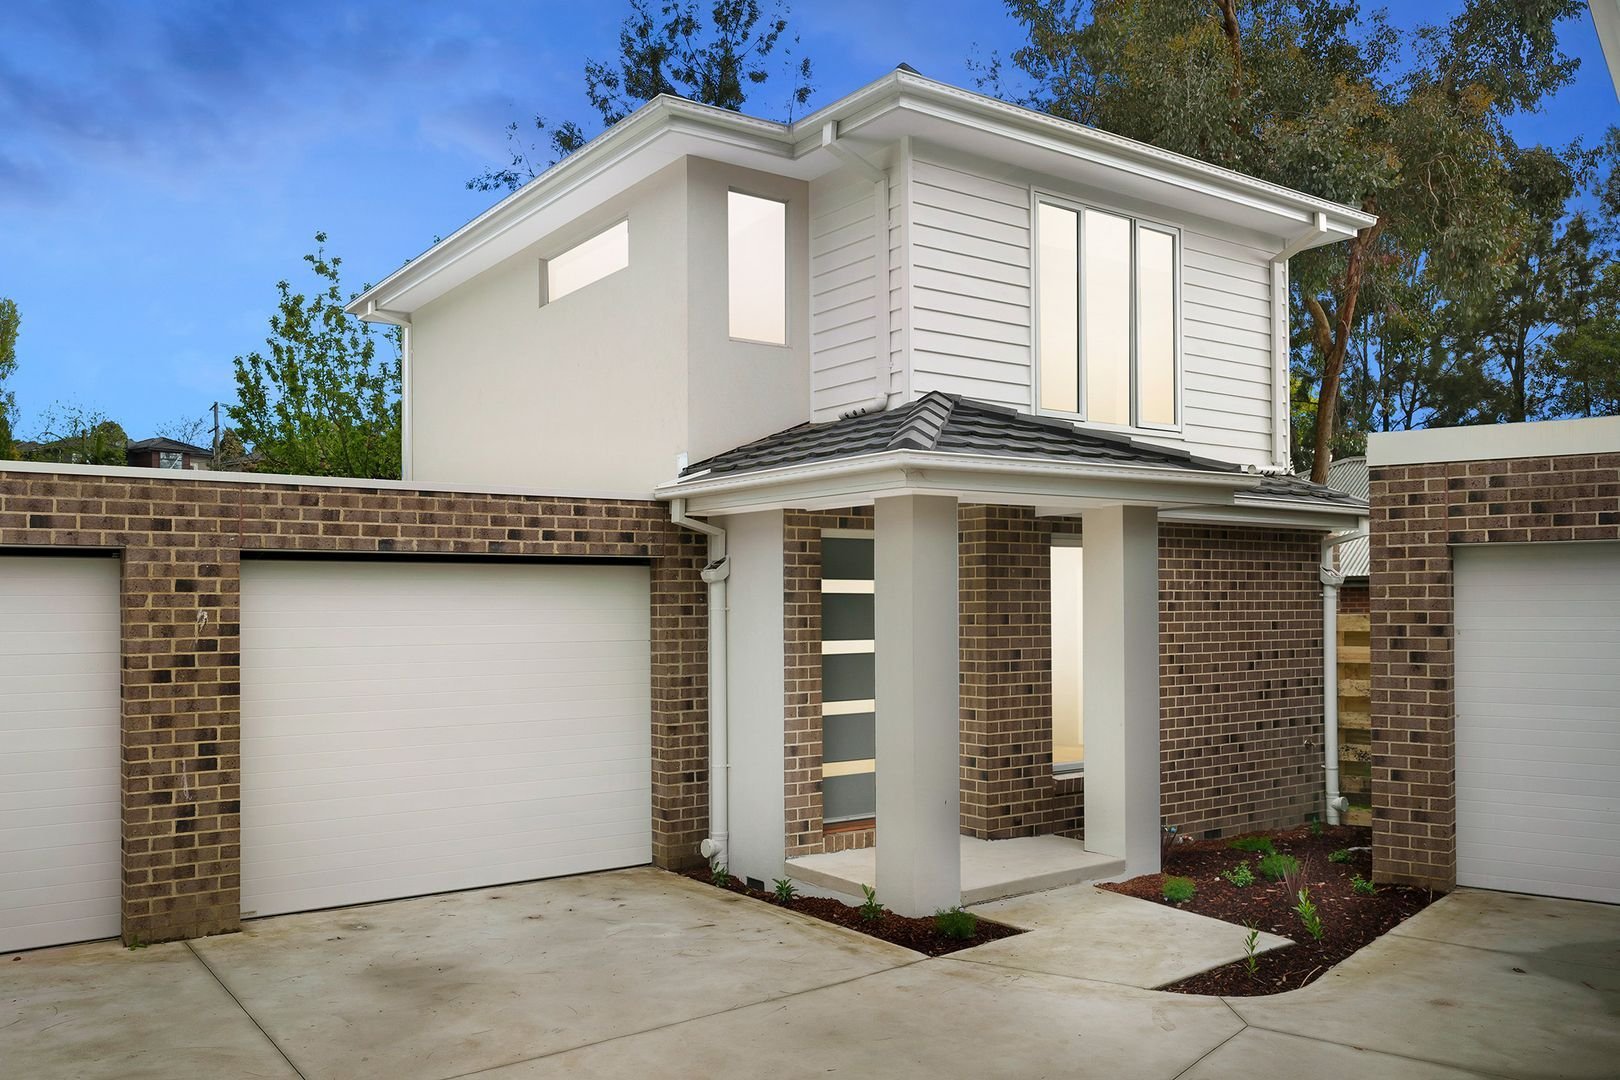 Croydon - Vinter Avenue - 52-62 Vinter Avenue, Croydon, VIC 3136 - Townly - 2.jpg